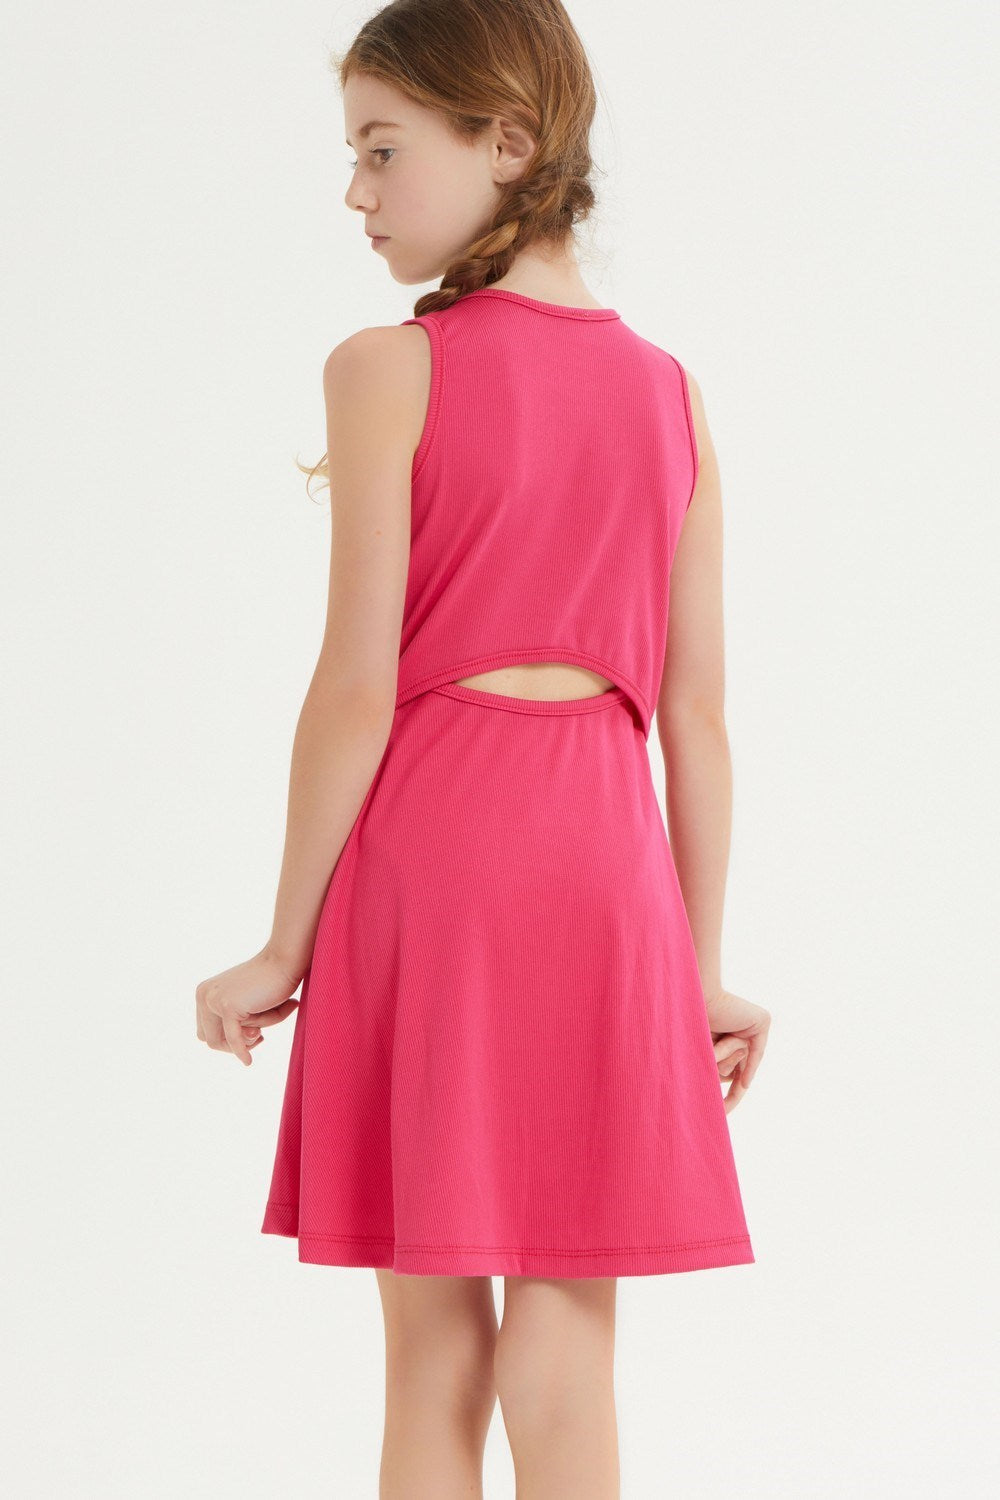 TWEEN CUTOUT BACK FIT AND FLARE SLEEVELESS DRESS